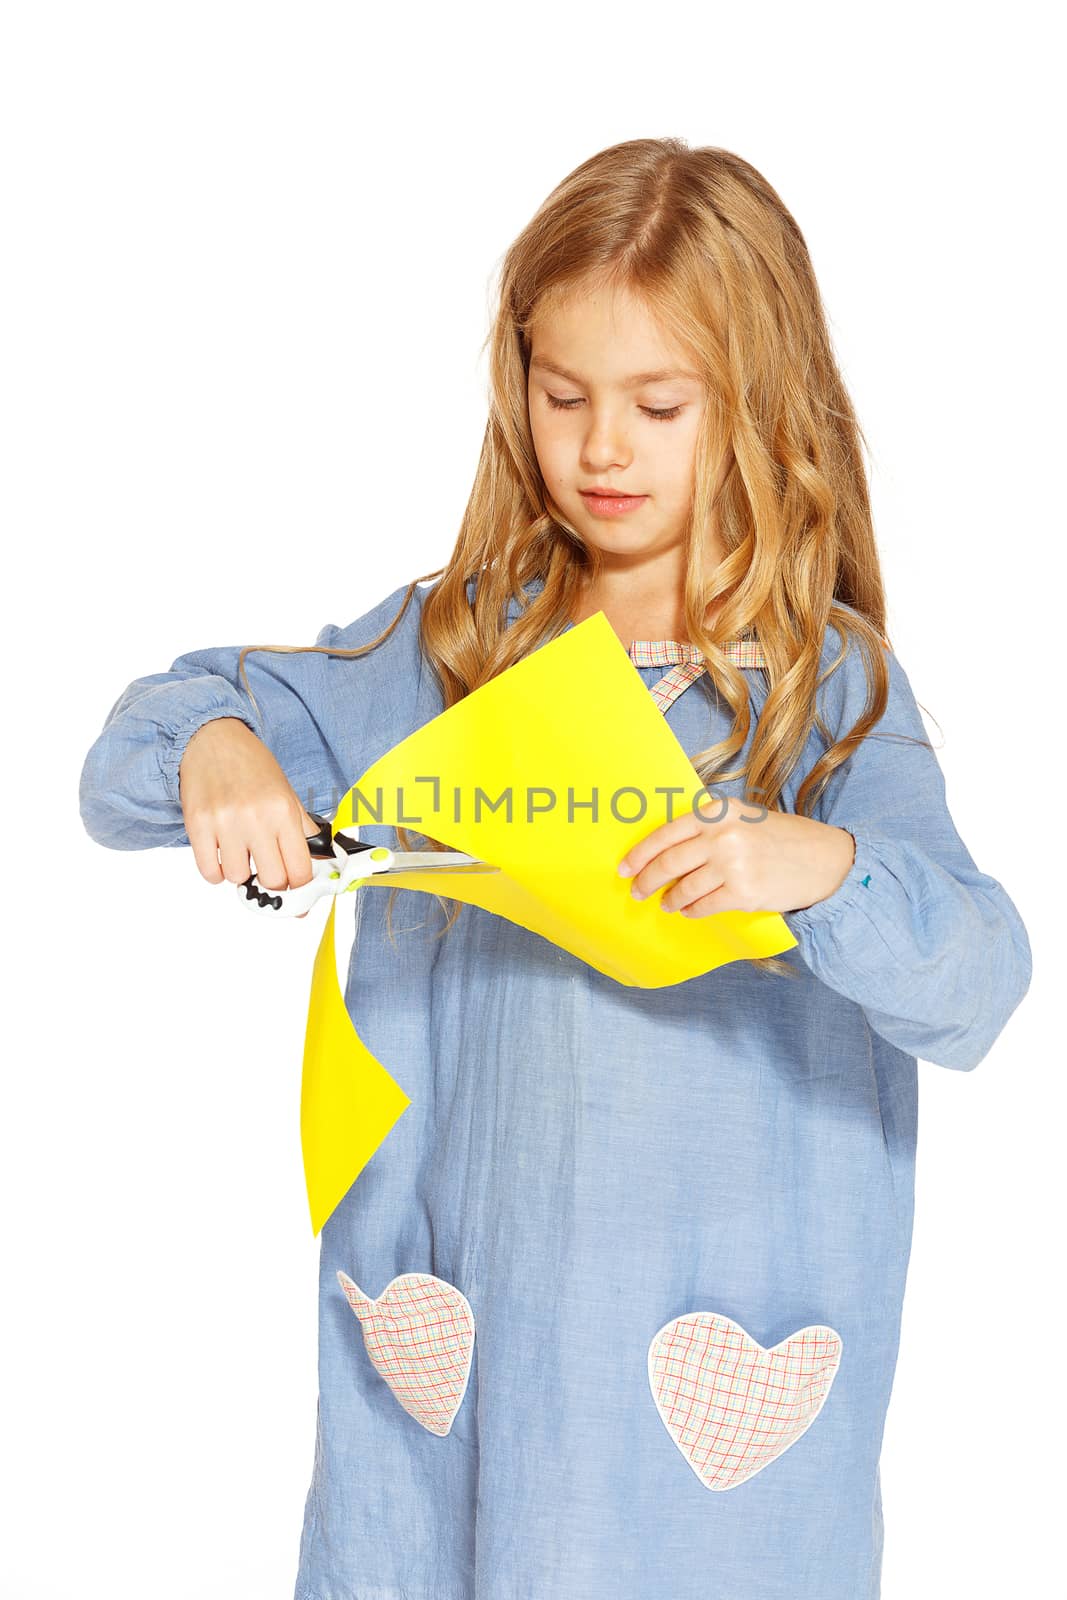 Cute little girl with scissors and yellow paper by gorov108